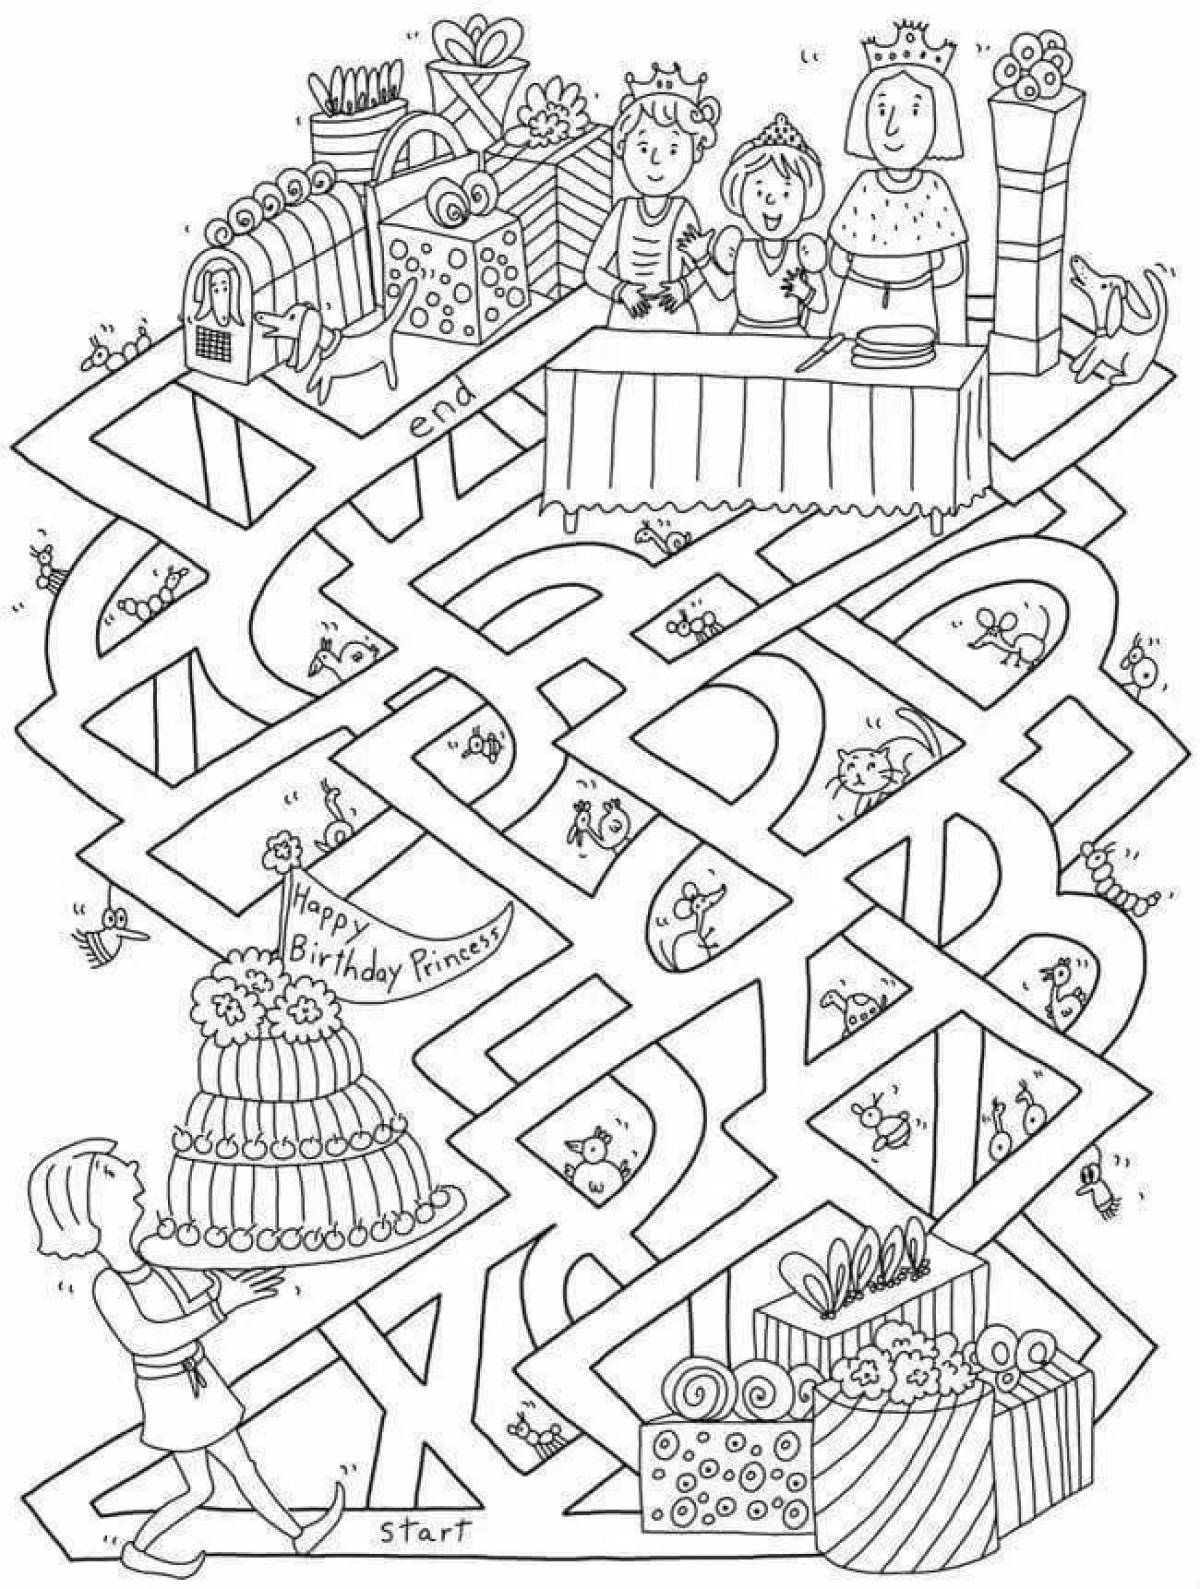 Fun coloring maze for kids